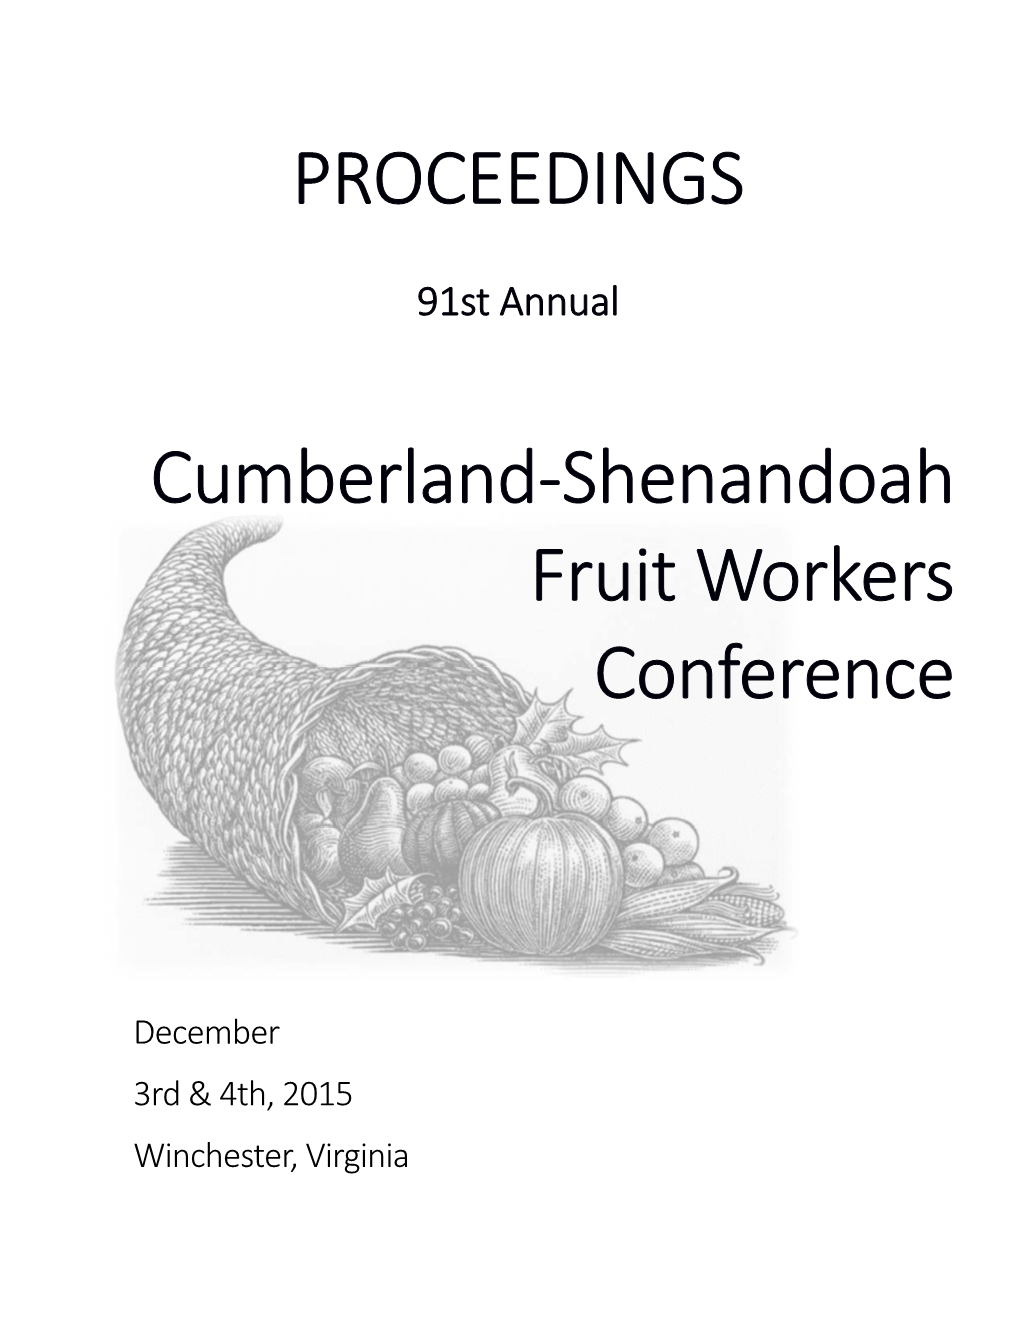 Cumberland-Shenandoah Fruit Workers Conference PROCEEDINGS